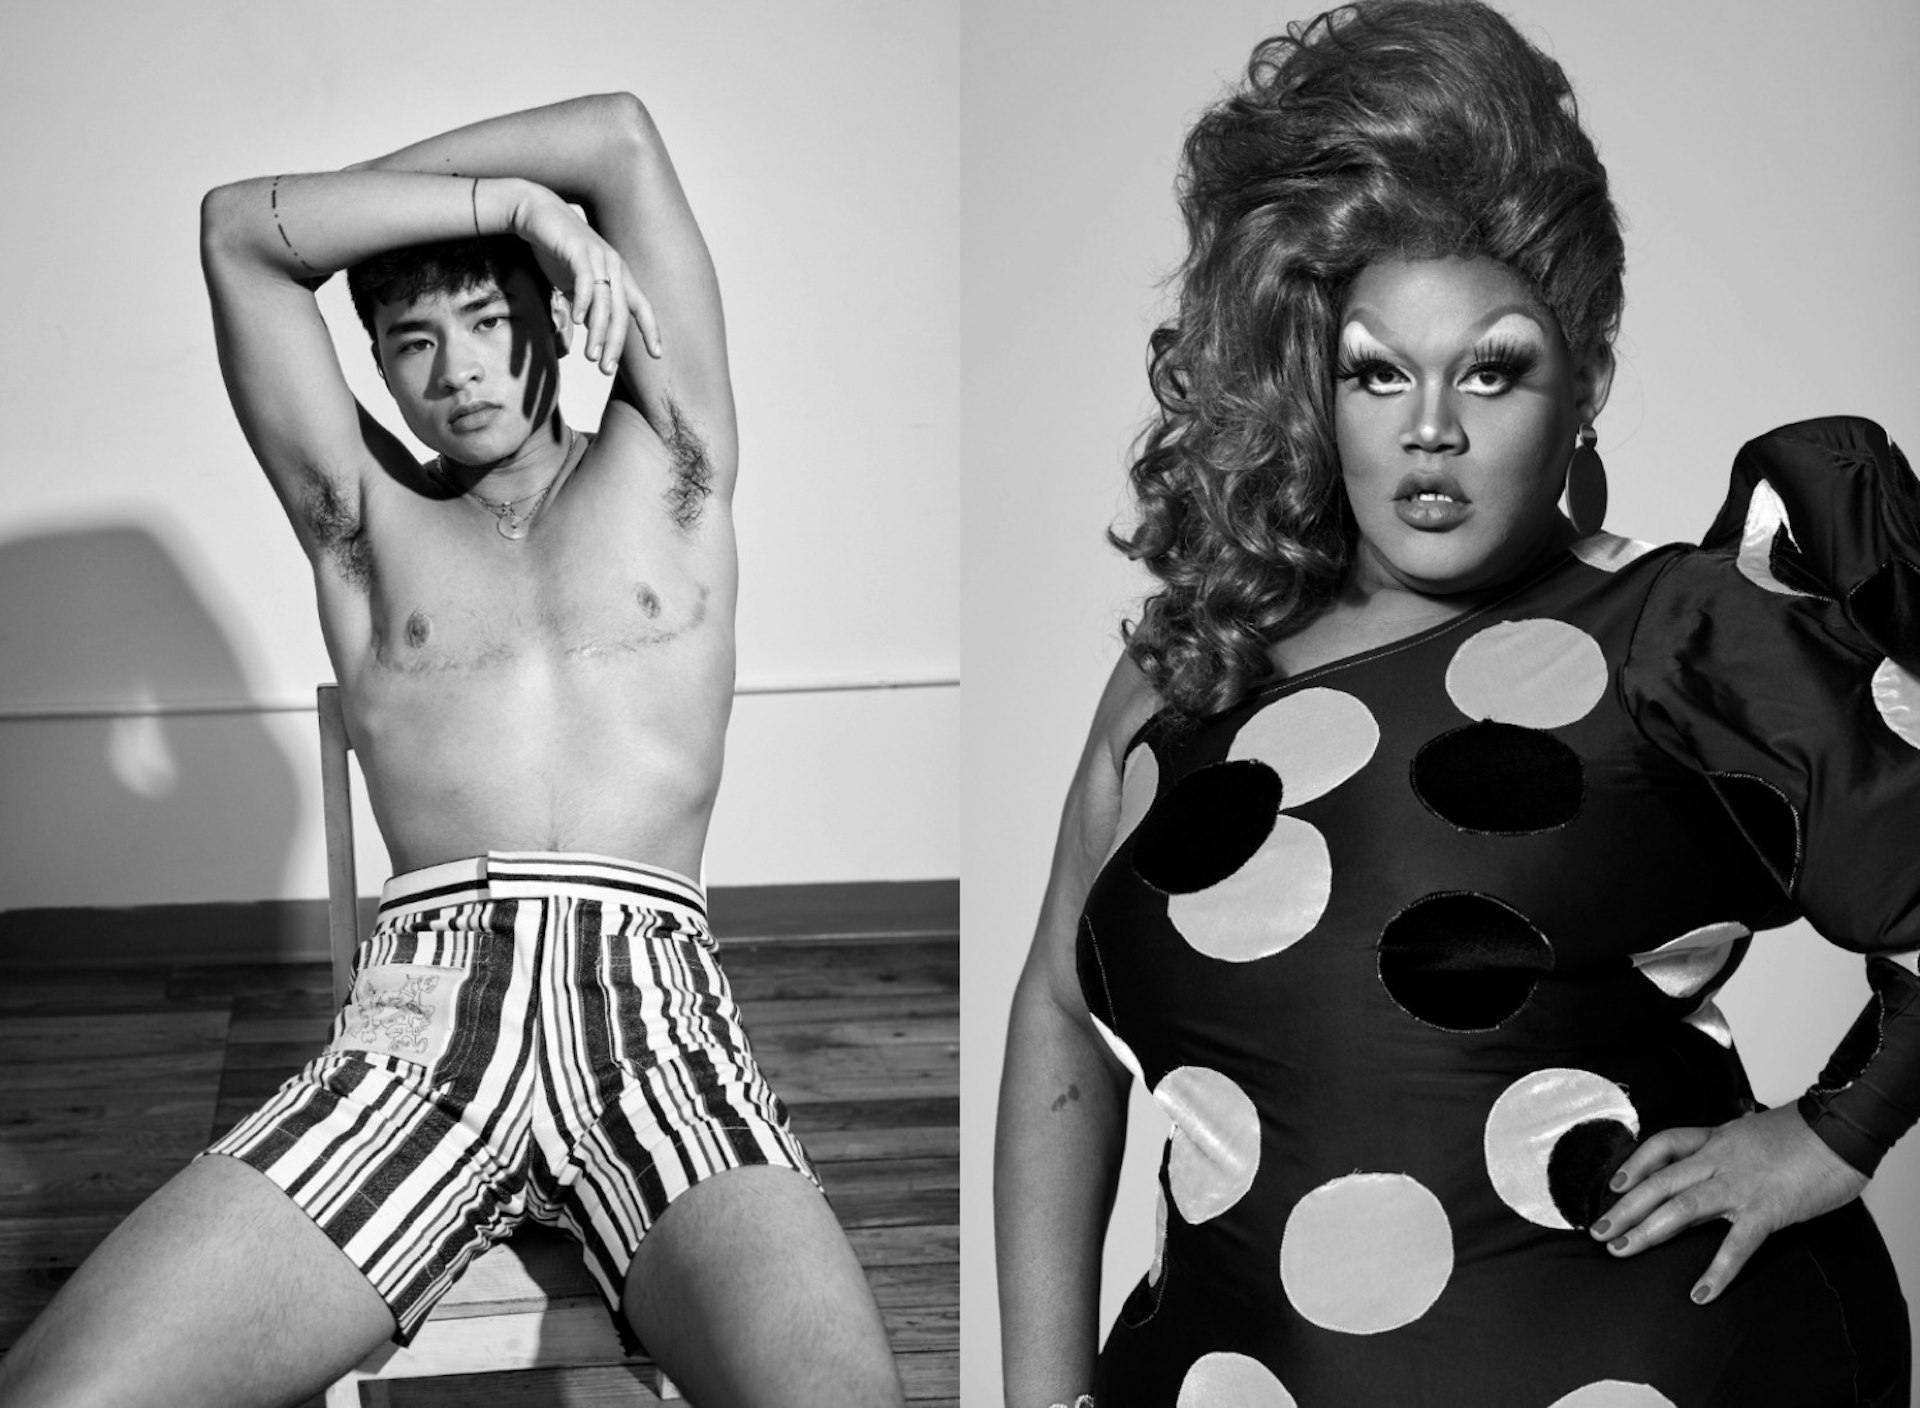 Collier Schorr’s portraits of LGBTQ activists and artists